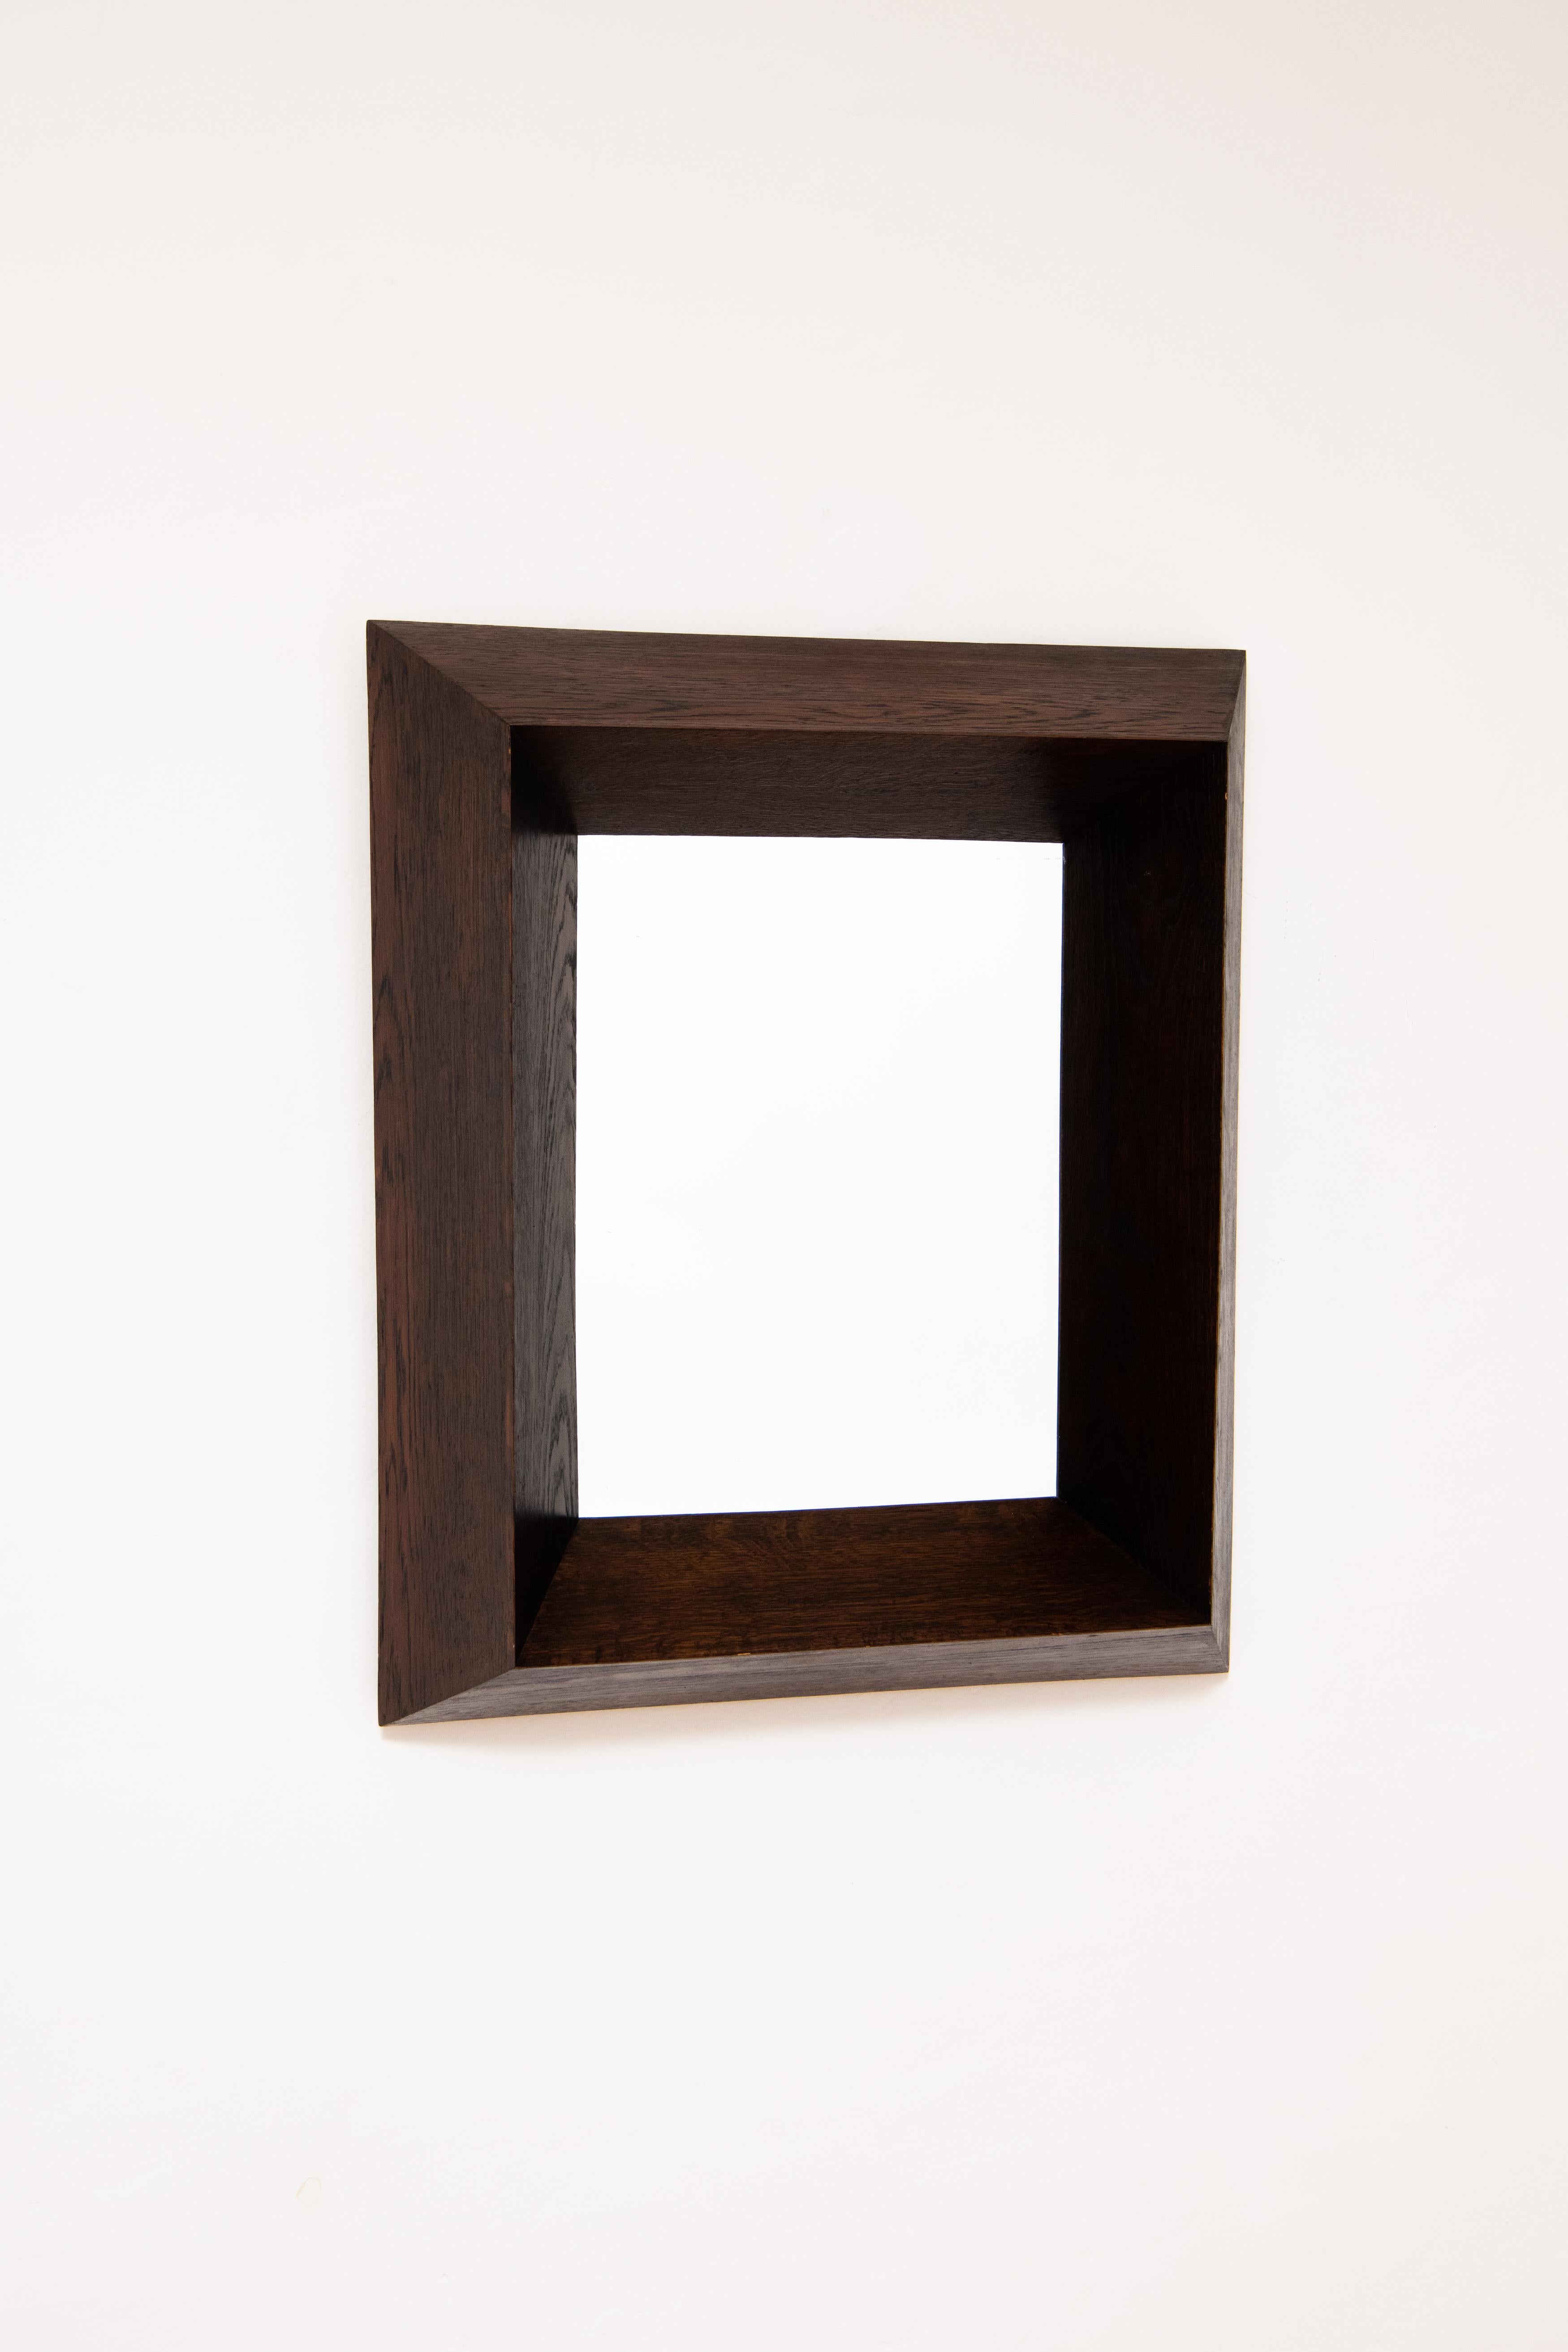 A rectangular wall mirror framed with a bold, dimensional frame with a Cubist influence. The frame, which projects from the wall, is made of dark stained oak wood and is hollow for the sake of hanging on a wall. Belgian art deco circa 1930-1940.